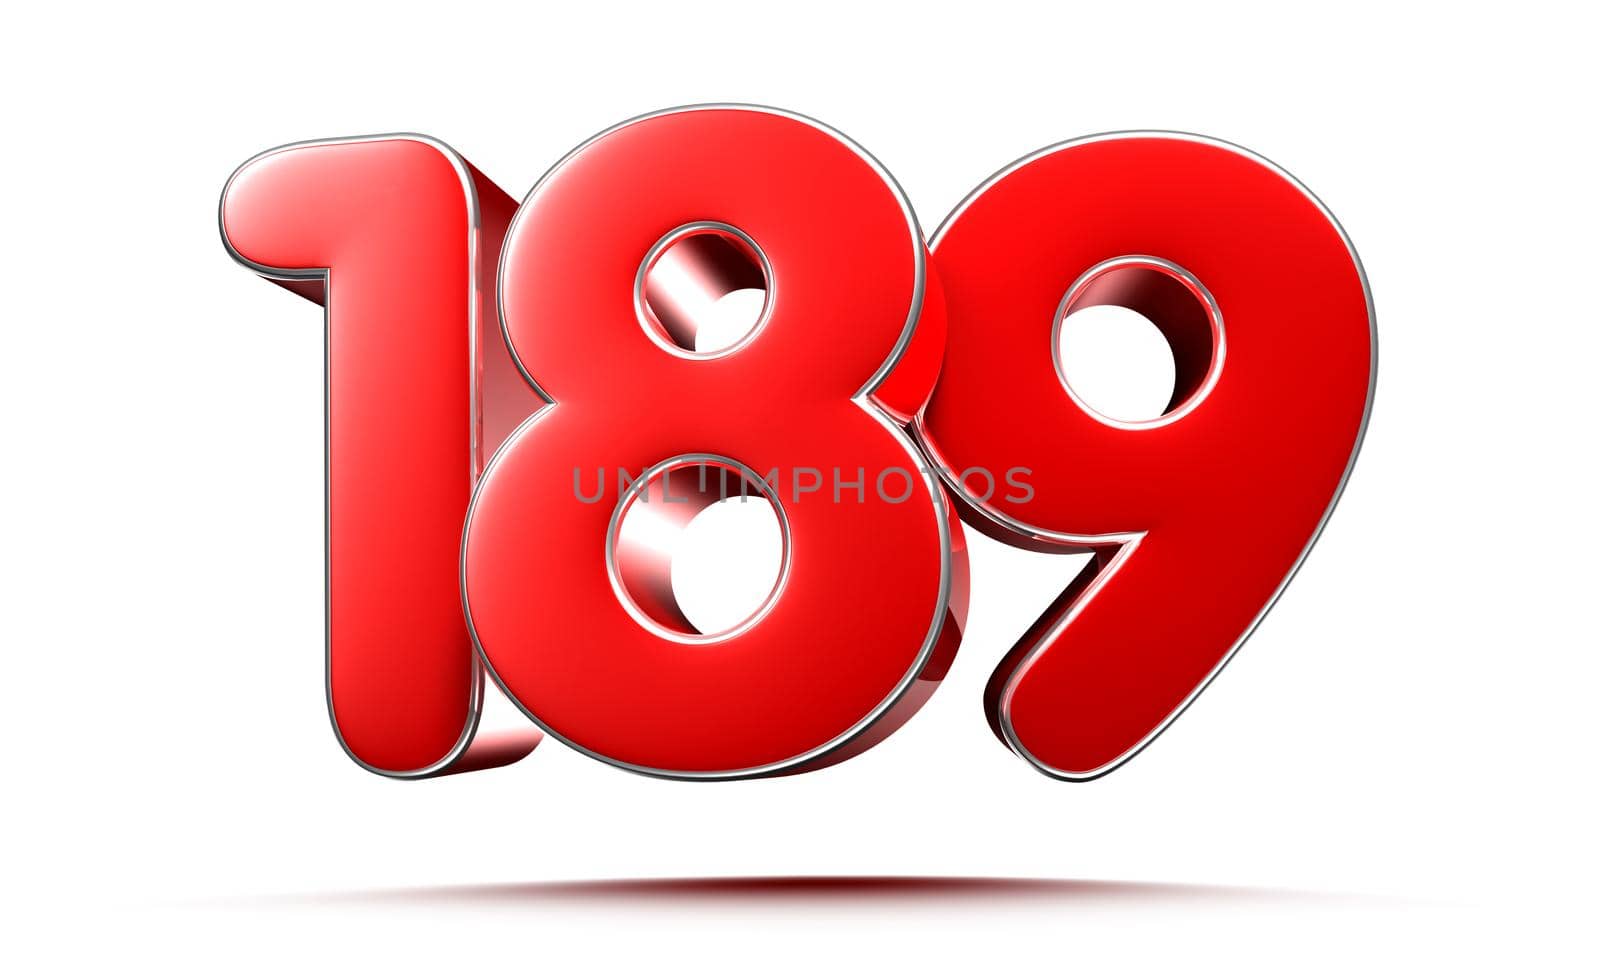 Rounded red numbers 189 on white background 3D illustration with clipping path by thitimontoyai